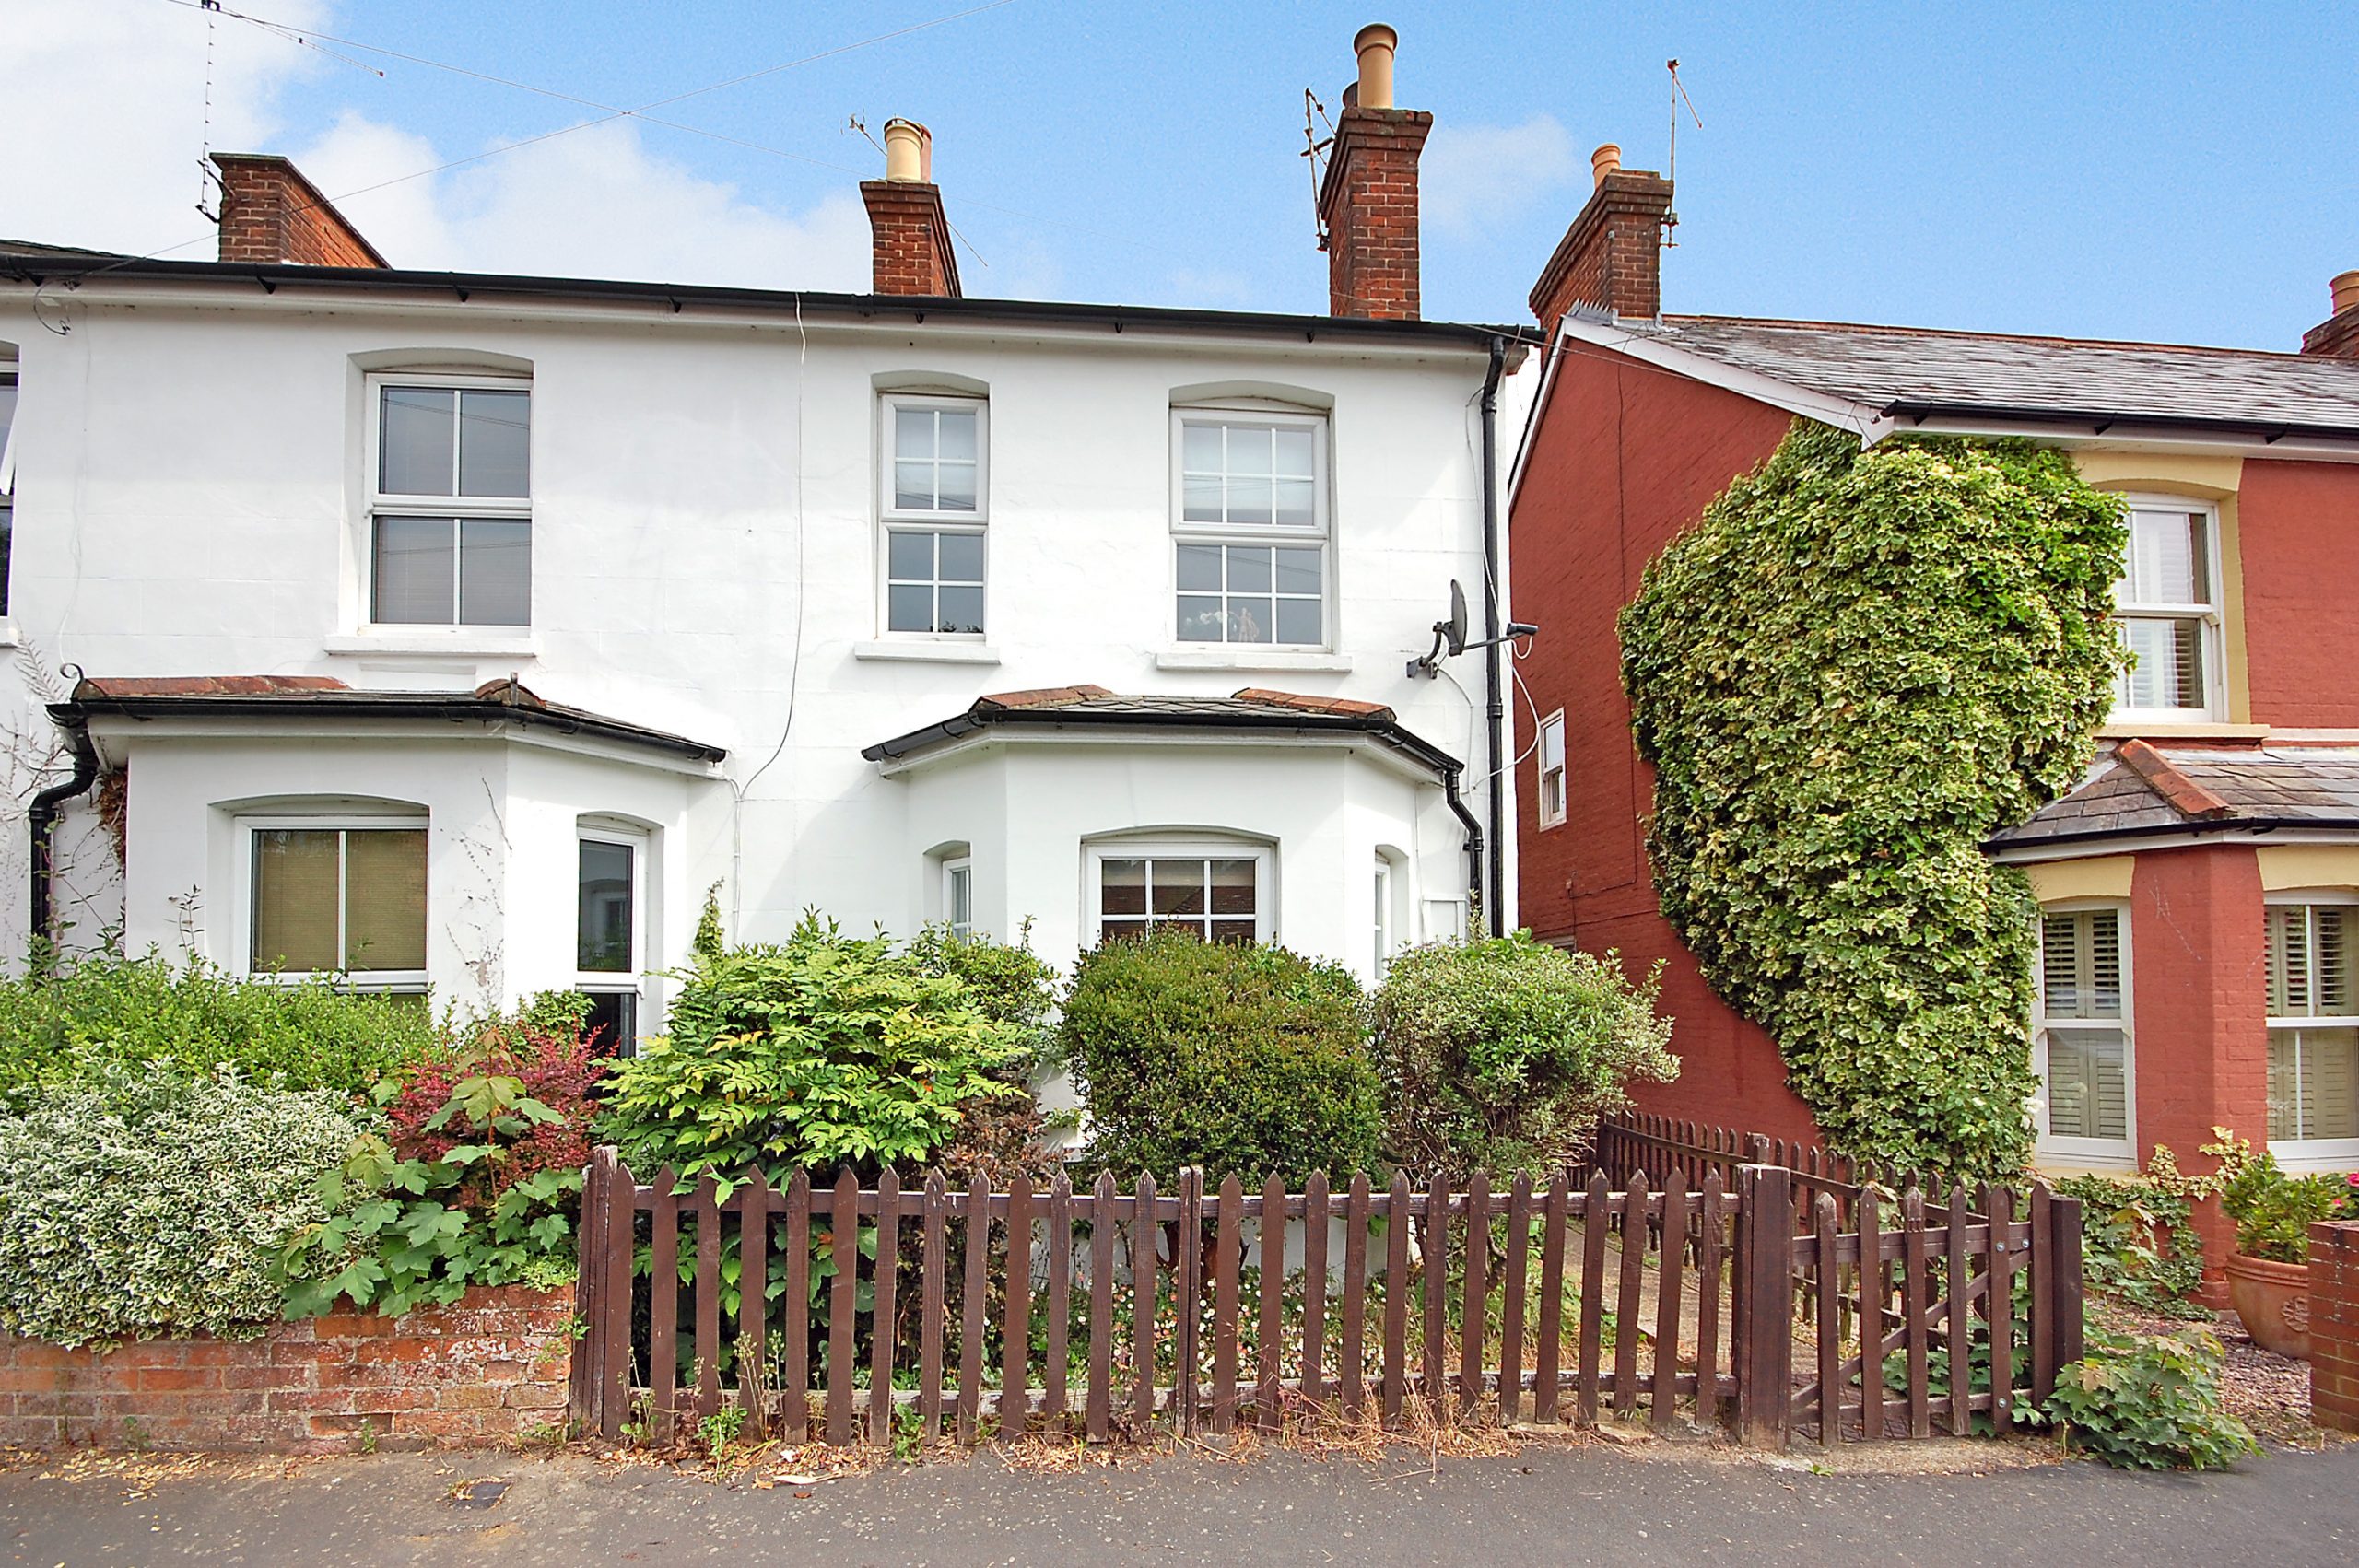 Sale Agreed in days above guide price!